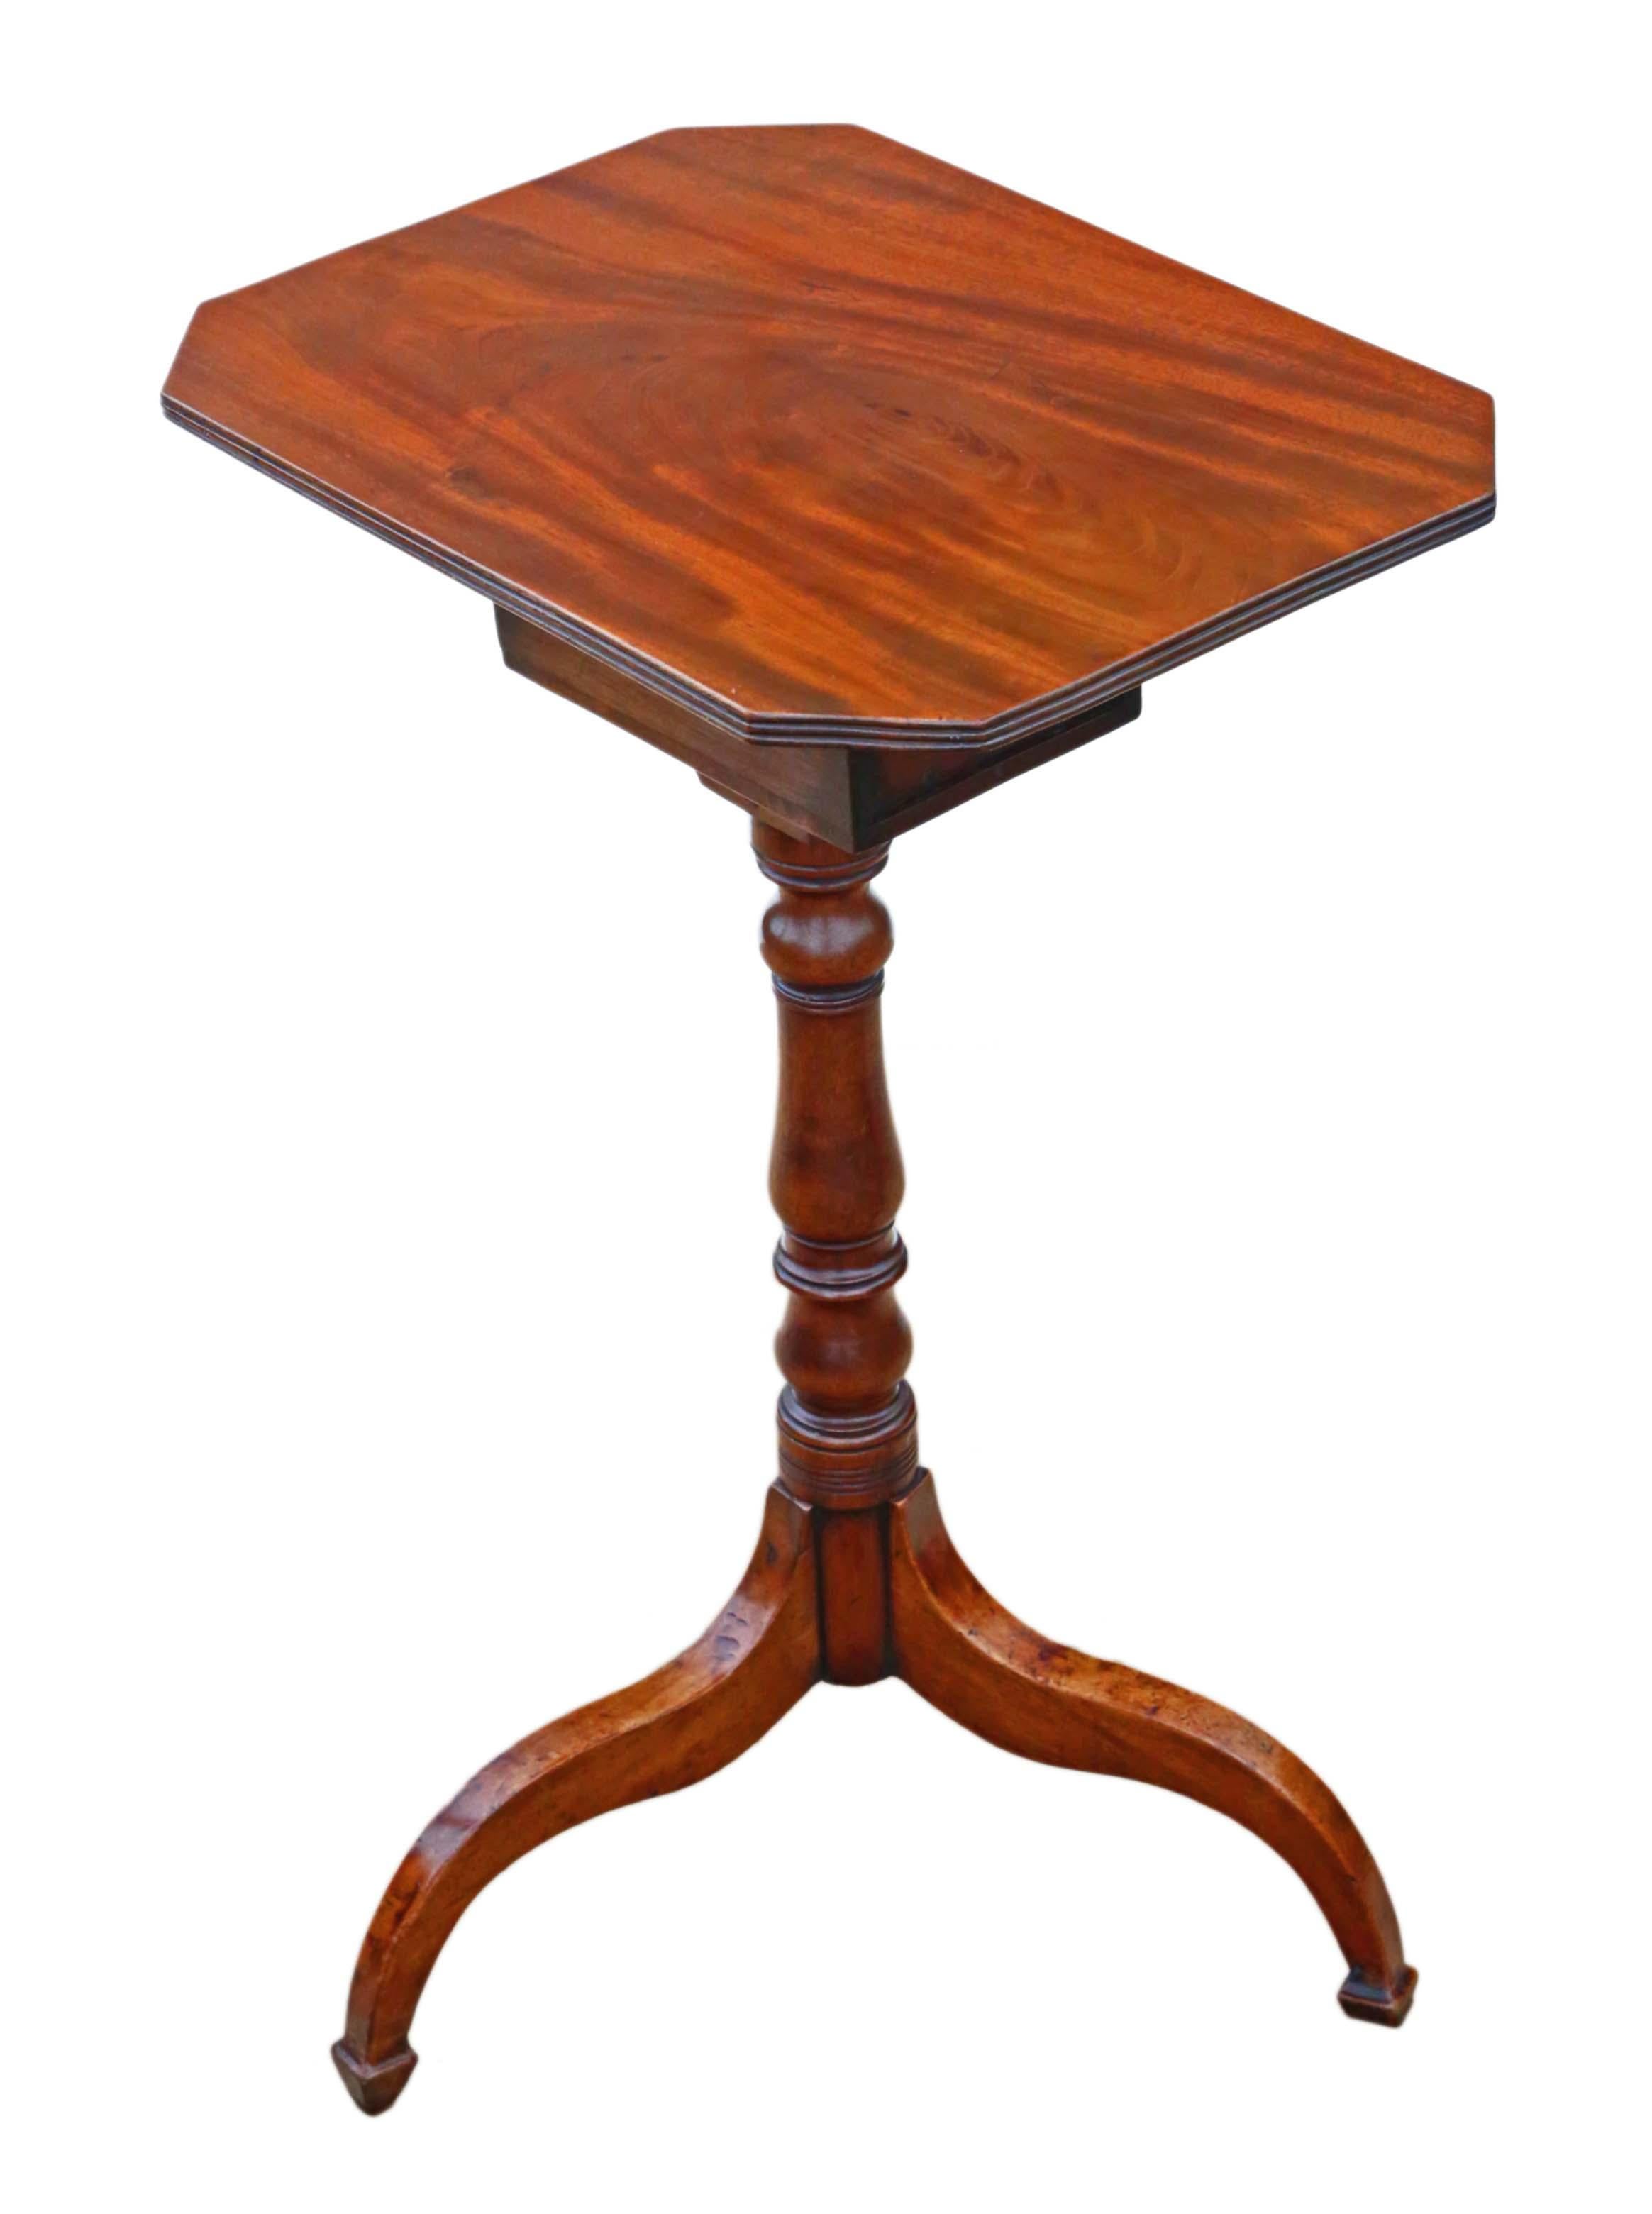 Antique fine quality Georgian C1800 mahogany tilt top wine or side table with drawer 

One of the best that you will find.

Solid with no loose joints and the catch works. A charming table. The drawer slides freely.

No woodworm.

Would look